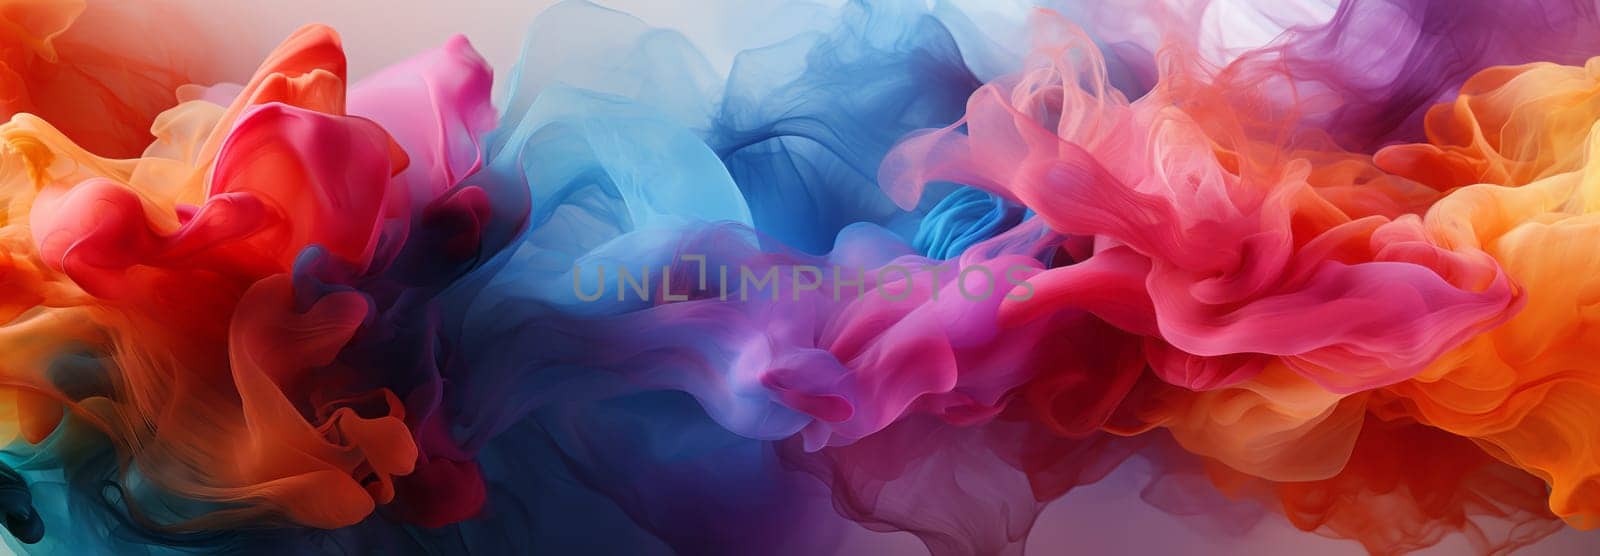 Abstract background. A vivid paint splash swirling, mix of colors by NataliPopova